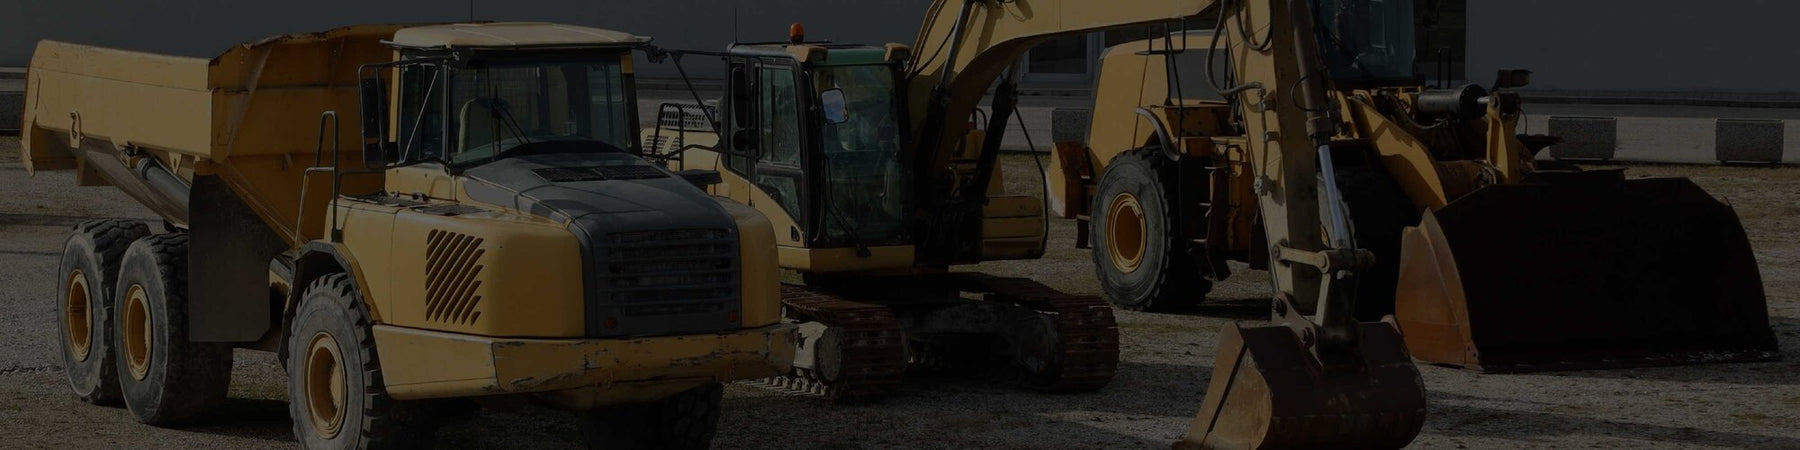 Common Transmission Problems in Heavy Equipment and How to Navigate Them